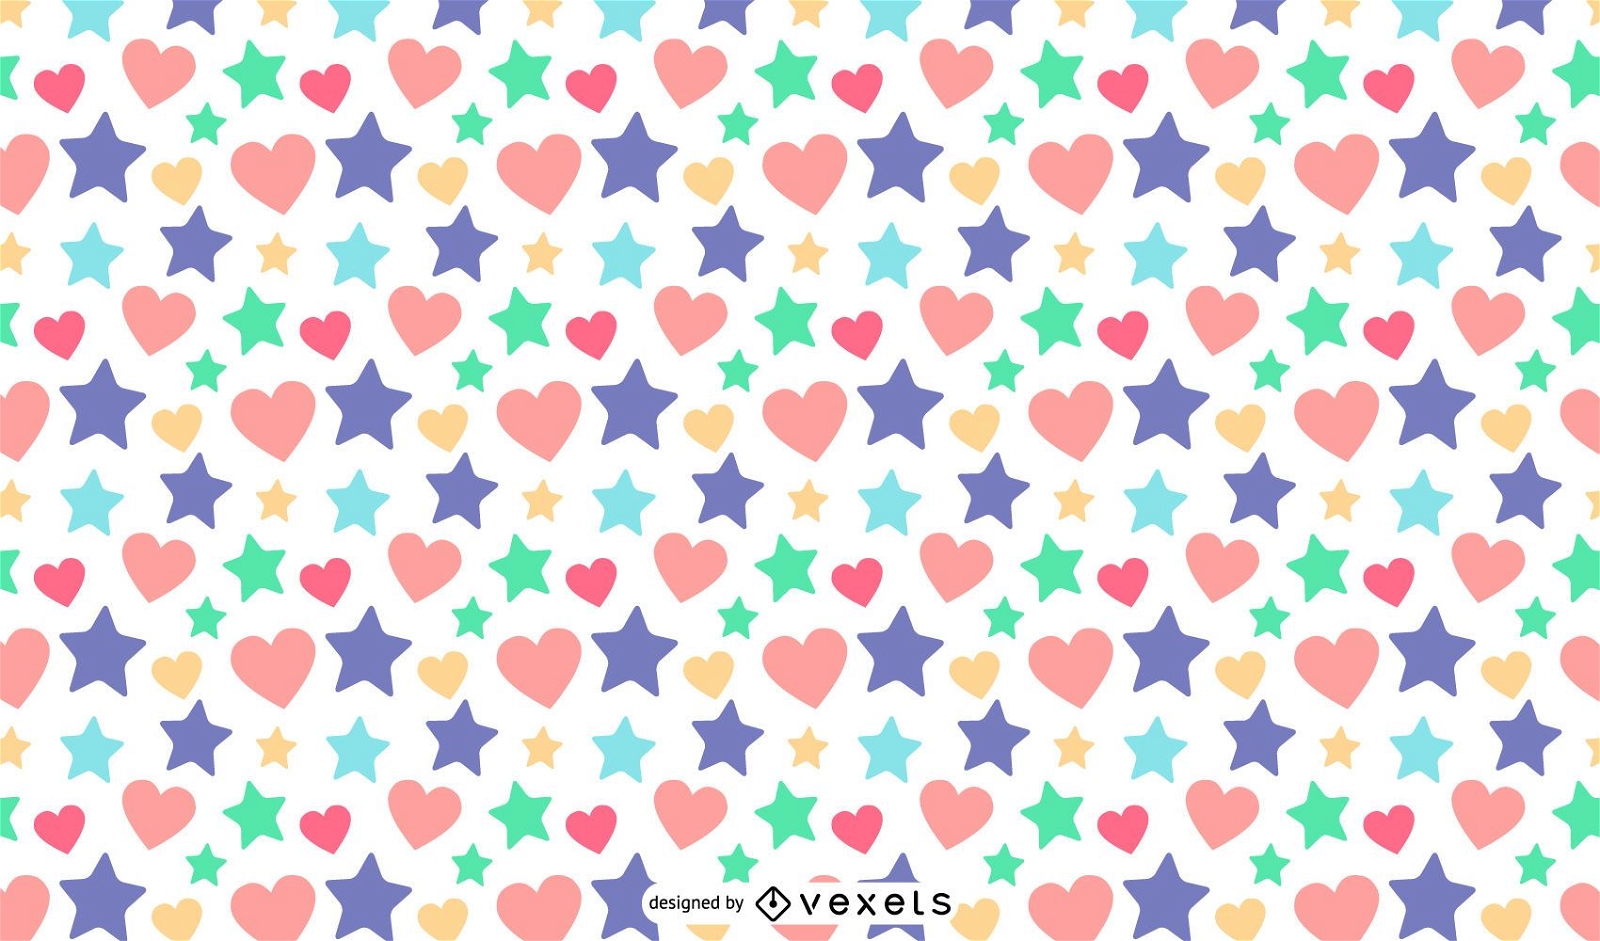 hearts and stars designs